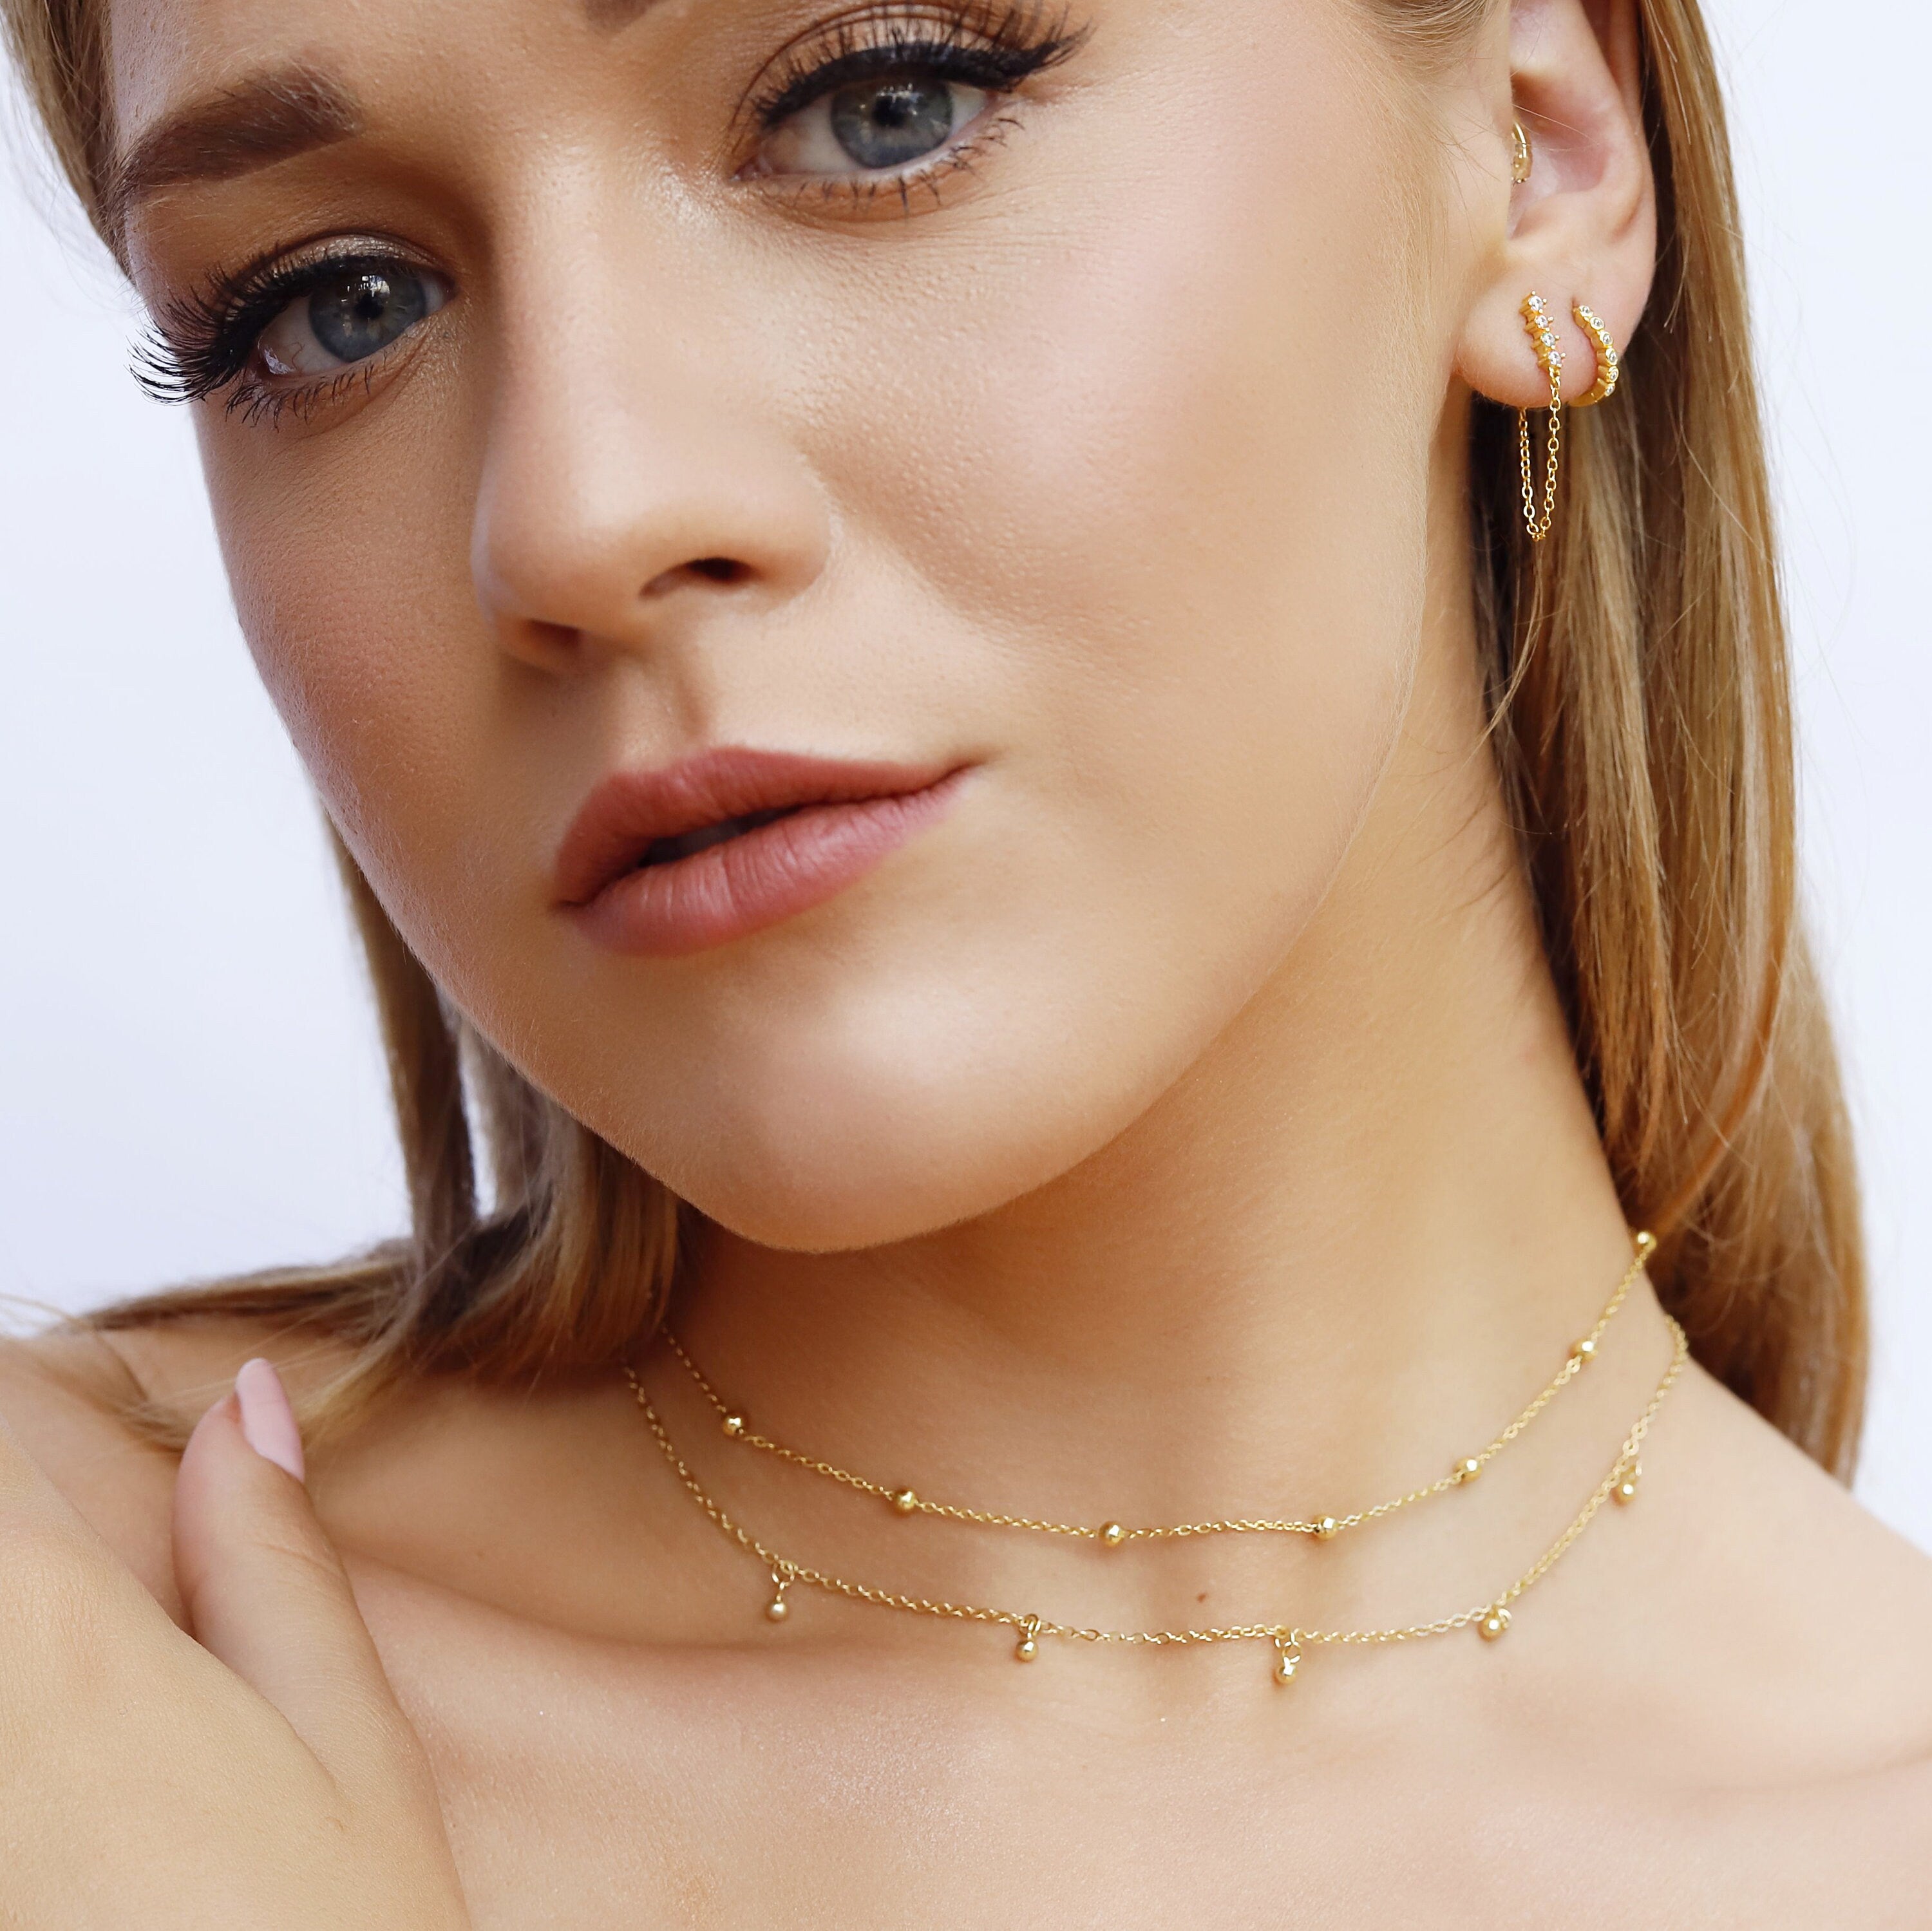 Beck - Dainty Gold Layering Necklace, 925 Sterling Silver 18K Gold plated, dainty beaded necklace